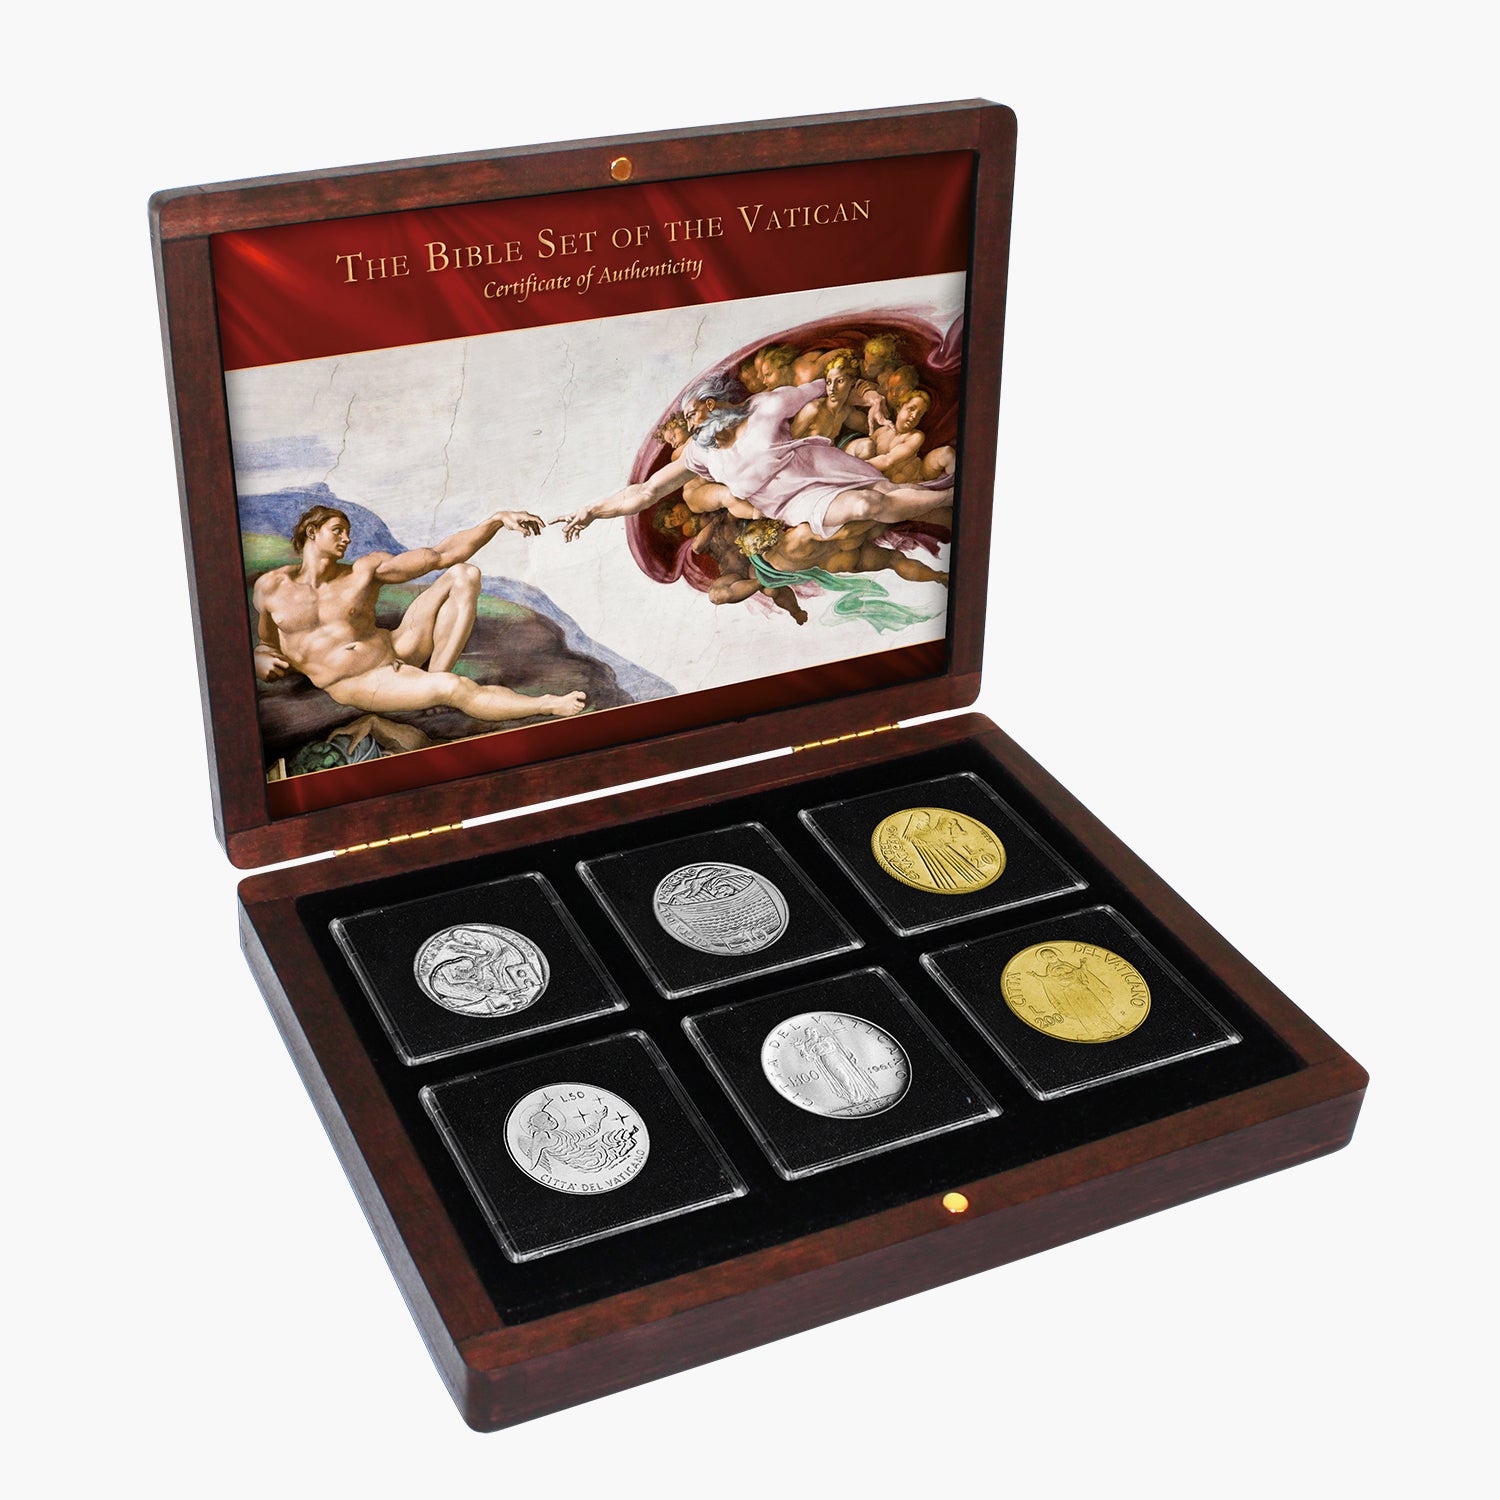 The Bible Set of the Vatican